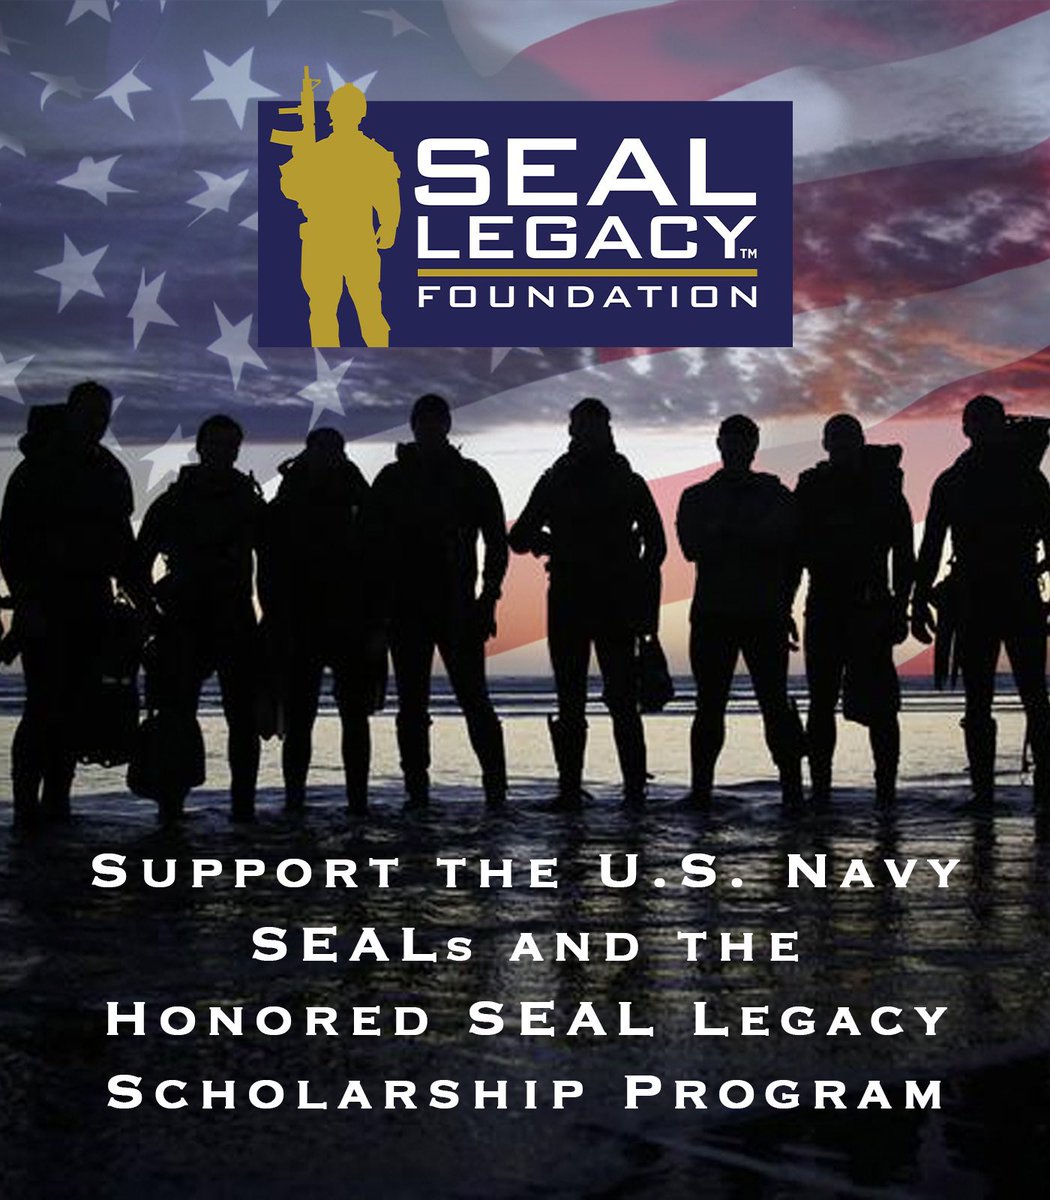 The SEAL Legacy Foundation has launched our Memorial Day campaign in support of the Honored SEAL Legacy Scholarship Program! Stand with the SEALs by making a donation or bidding in our auction today! 🇺🇸 DONATE: SEALLegacy.org/memorialday24 AUCTION: SEALLegacy.org/auction24